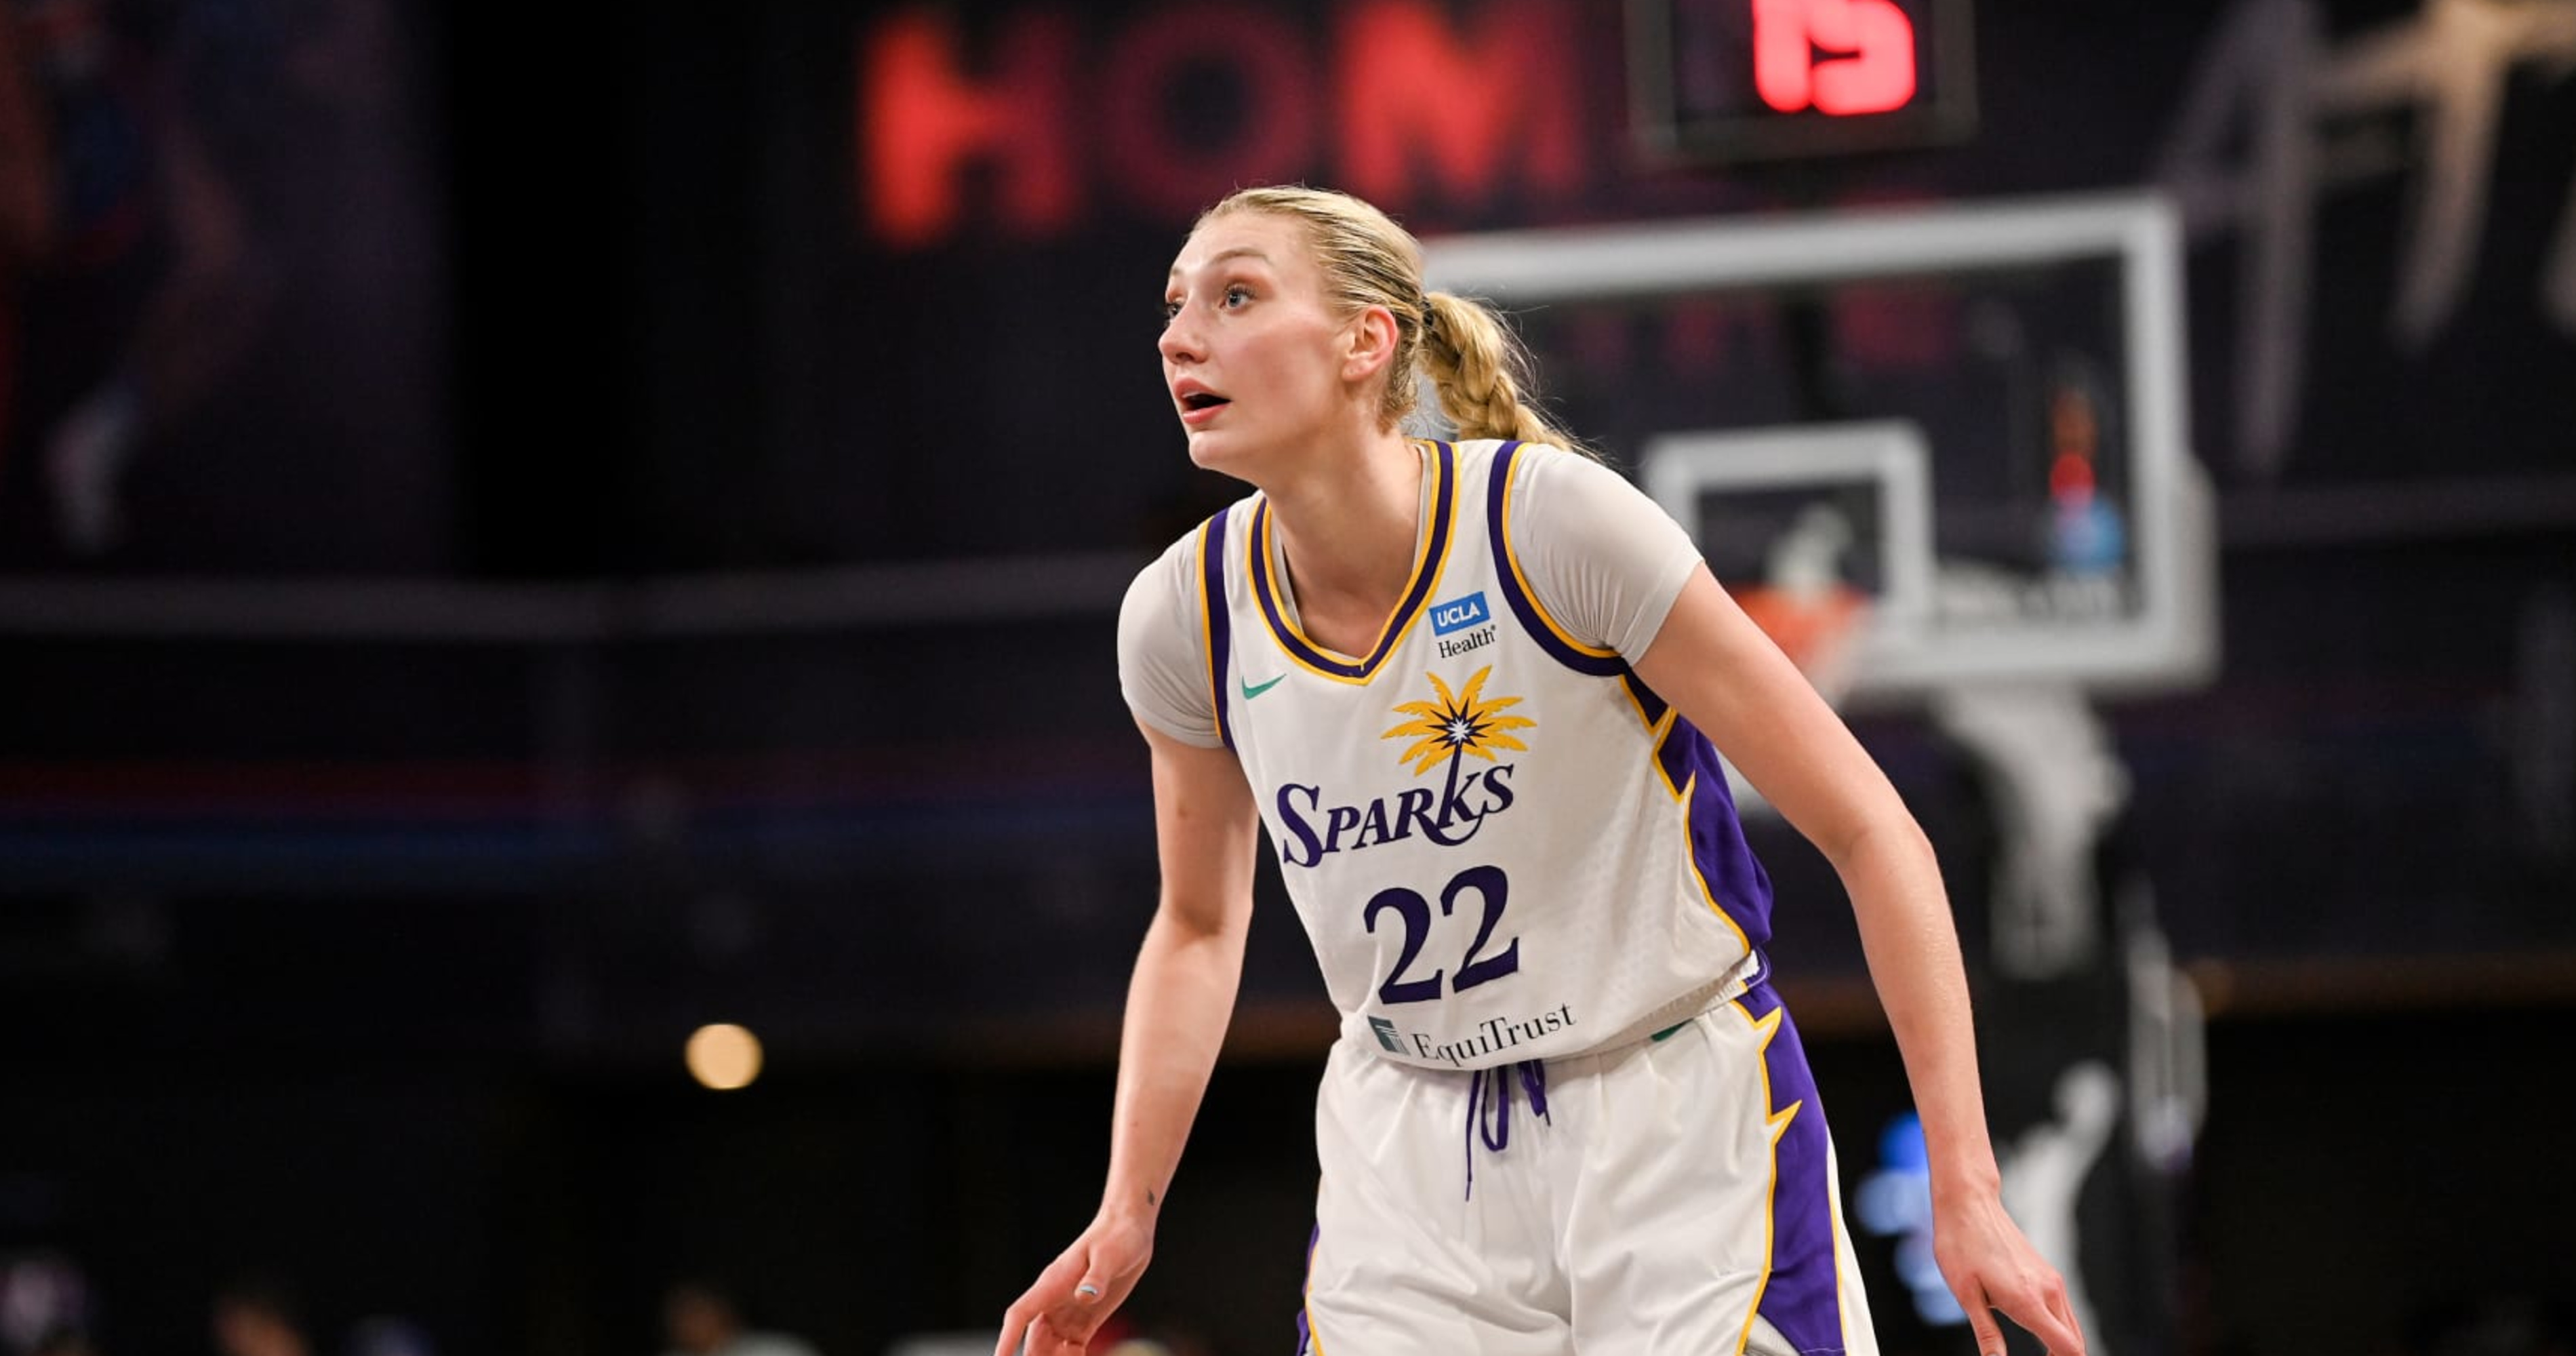 Sparks' Cameron Brink Diagnosed with Torn ACL After Knee Injury, Out for WNBA Season